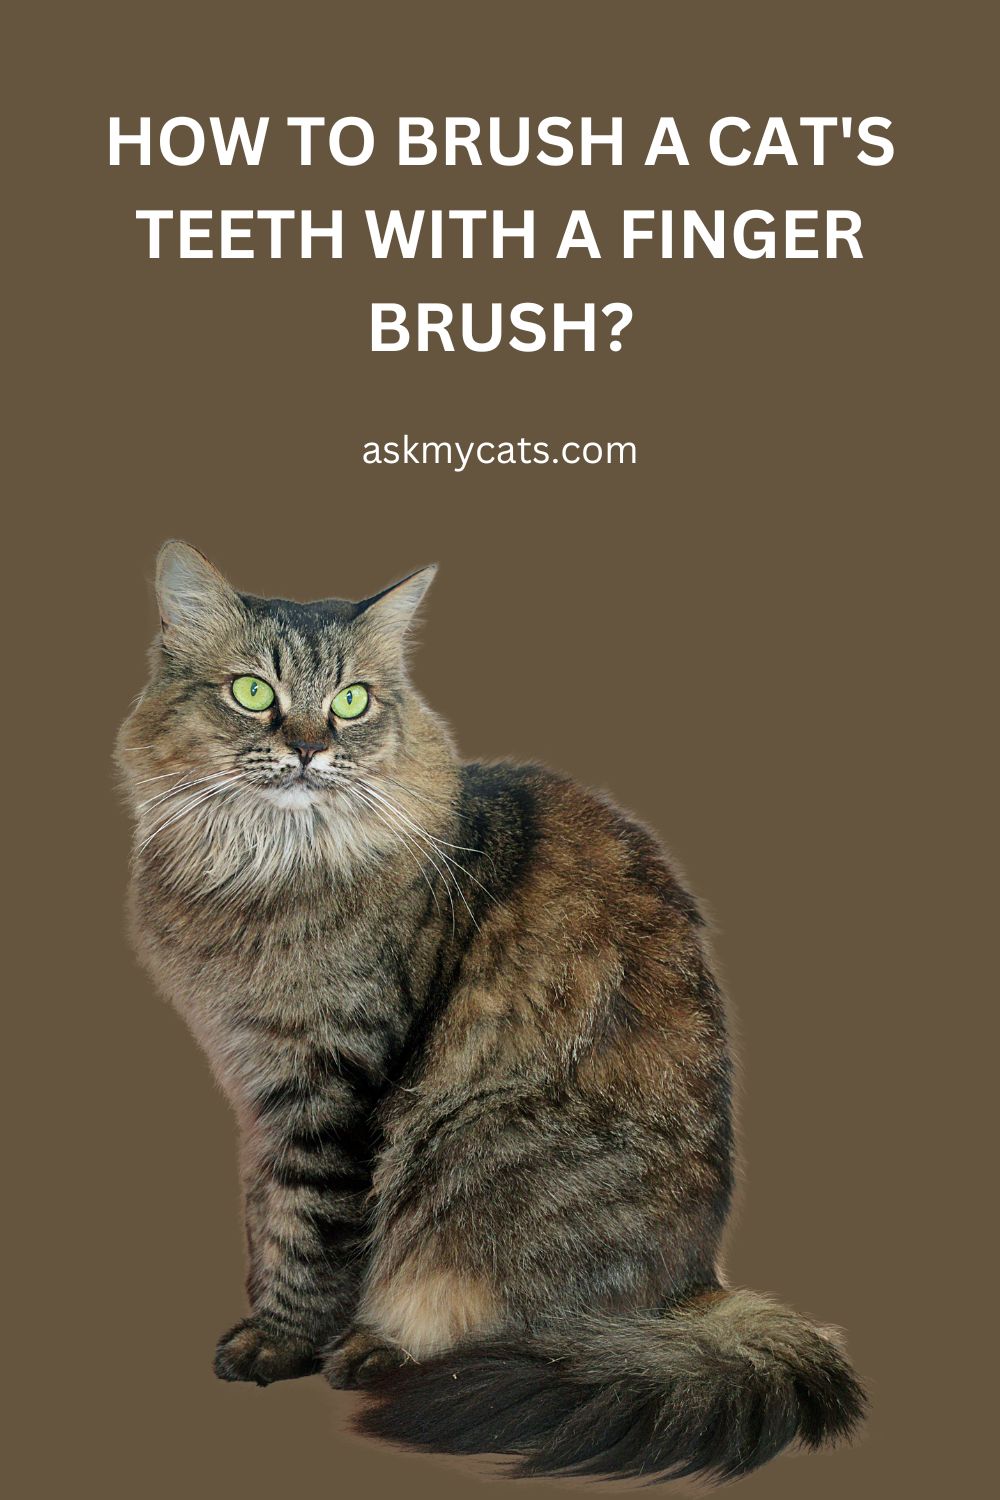 How to Brush a Cat's Teeth with a Finger Brush